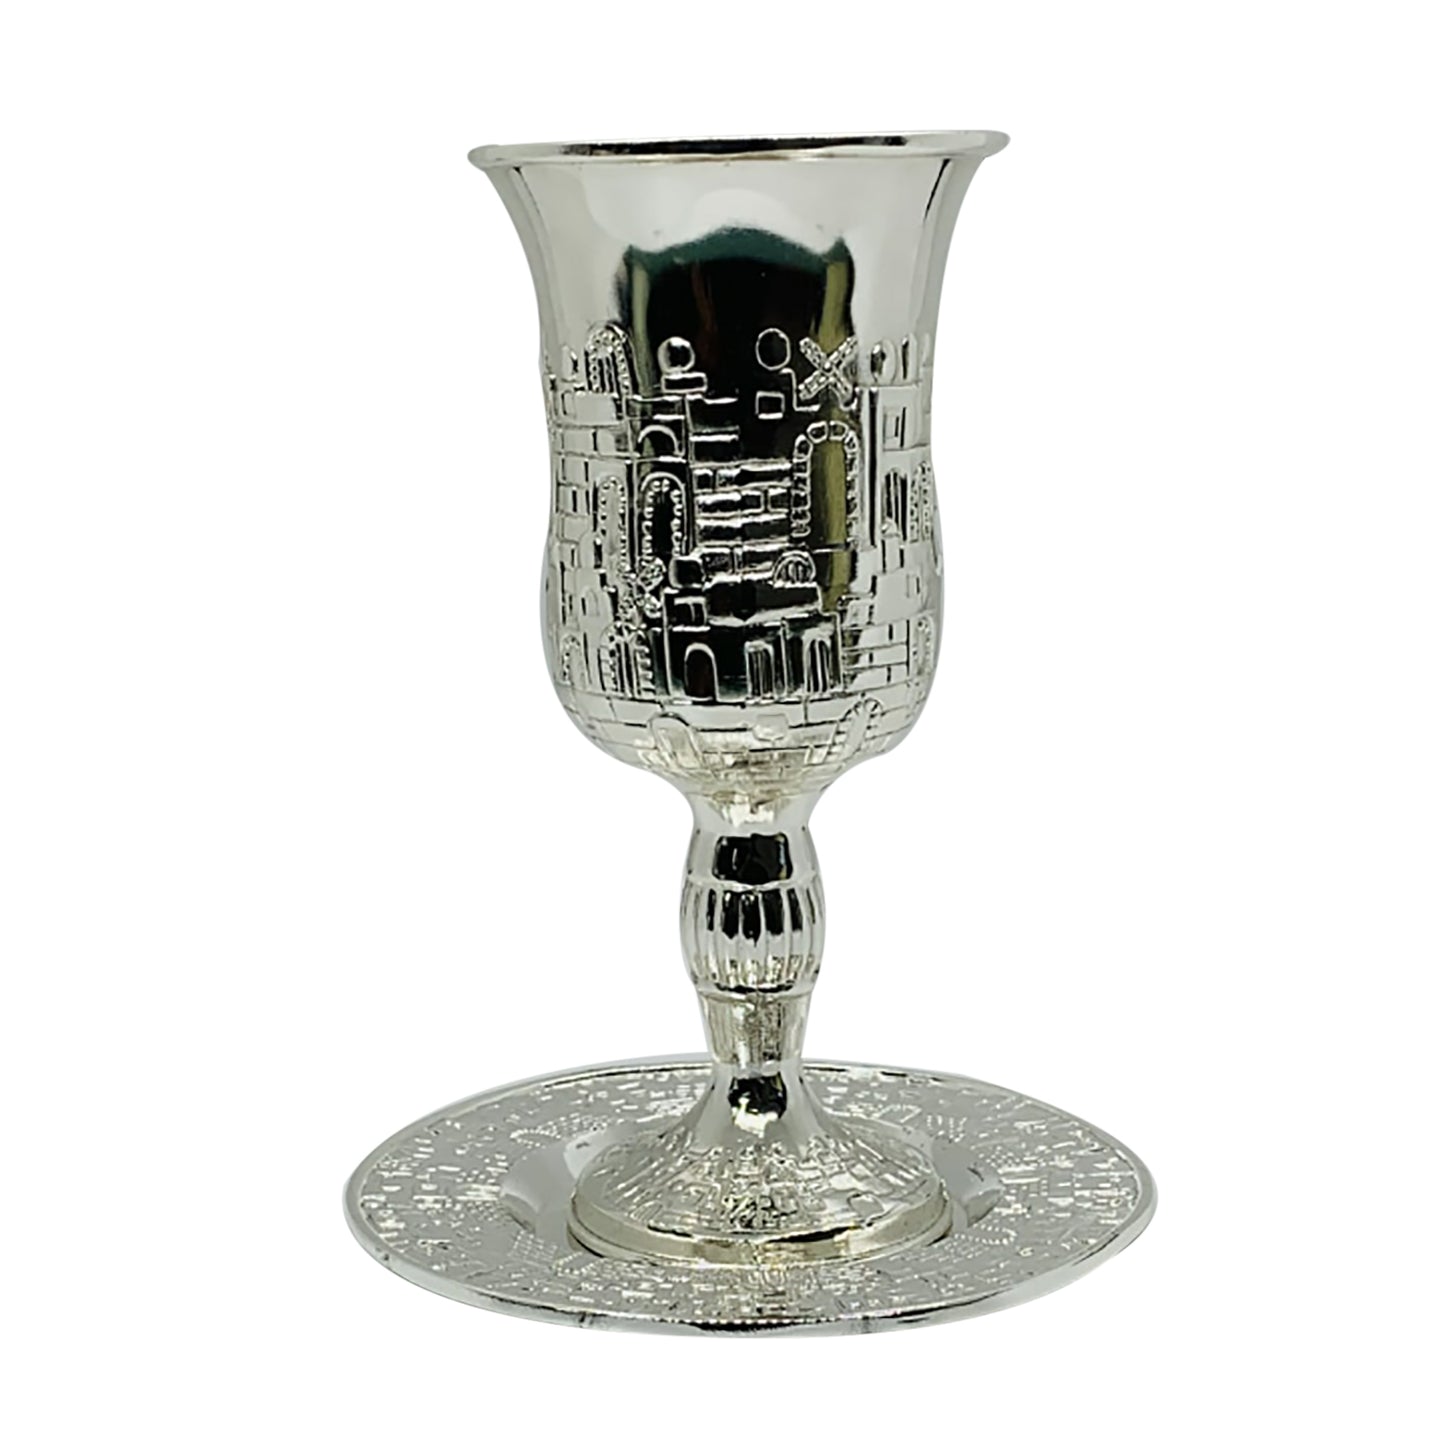 Kiddush Cup Nickel Plated With Plate - 6"